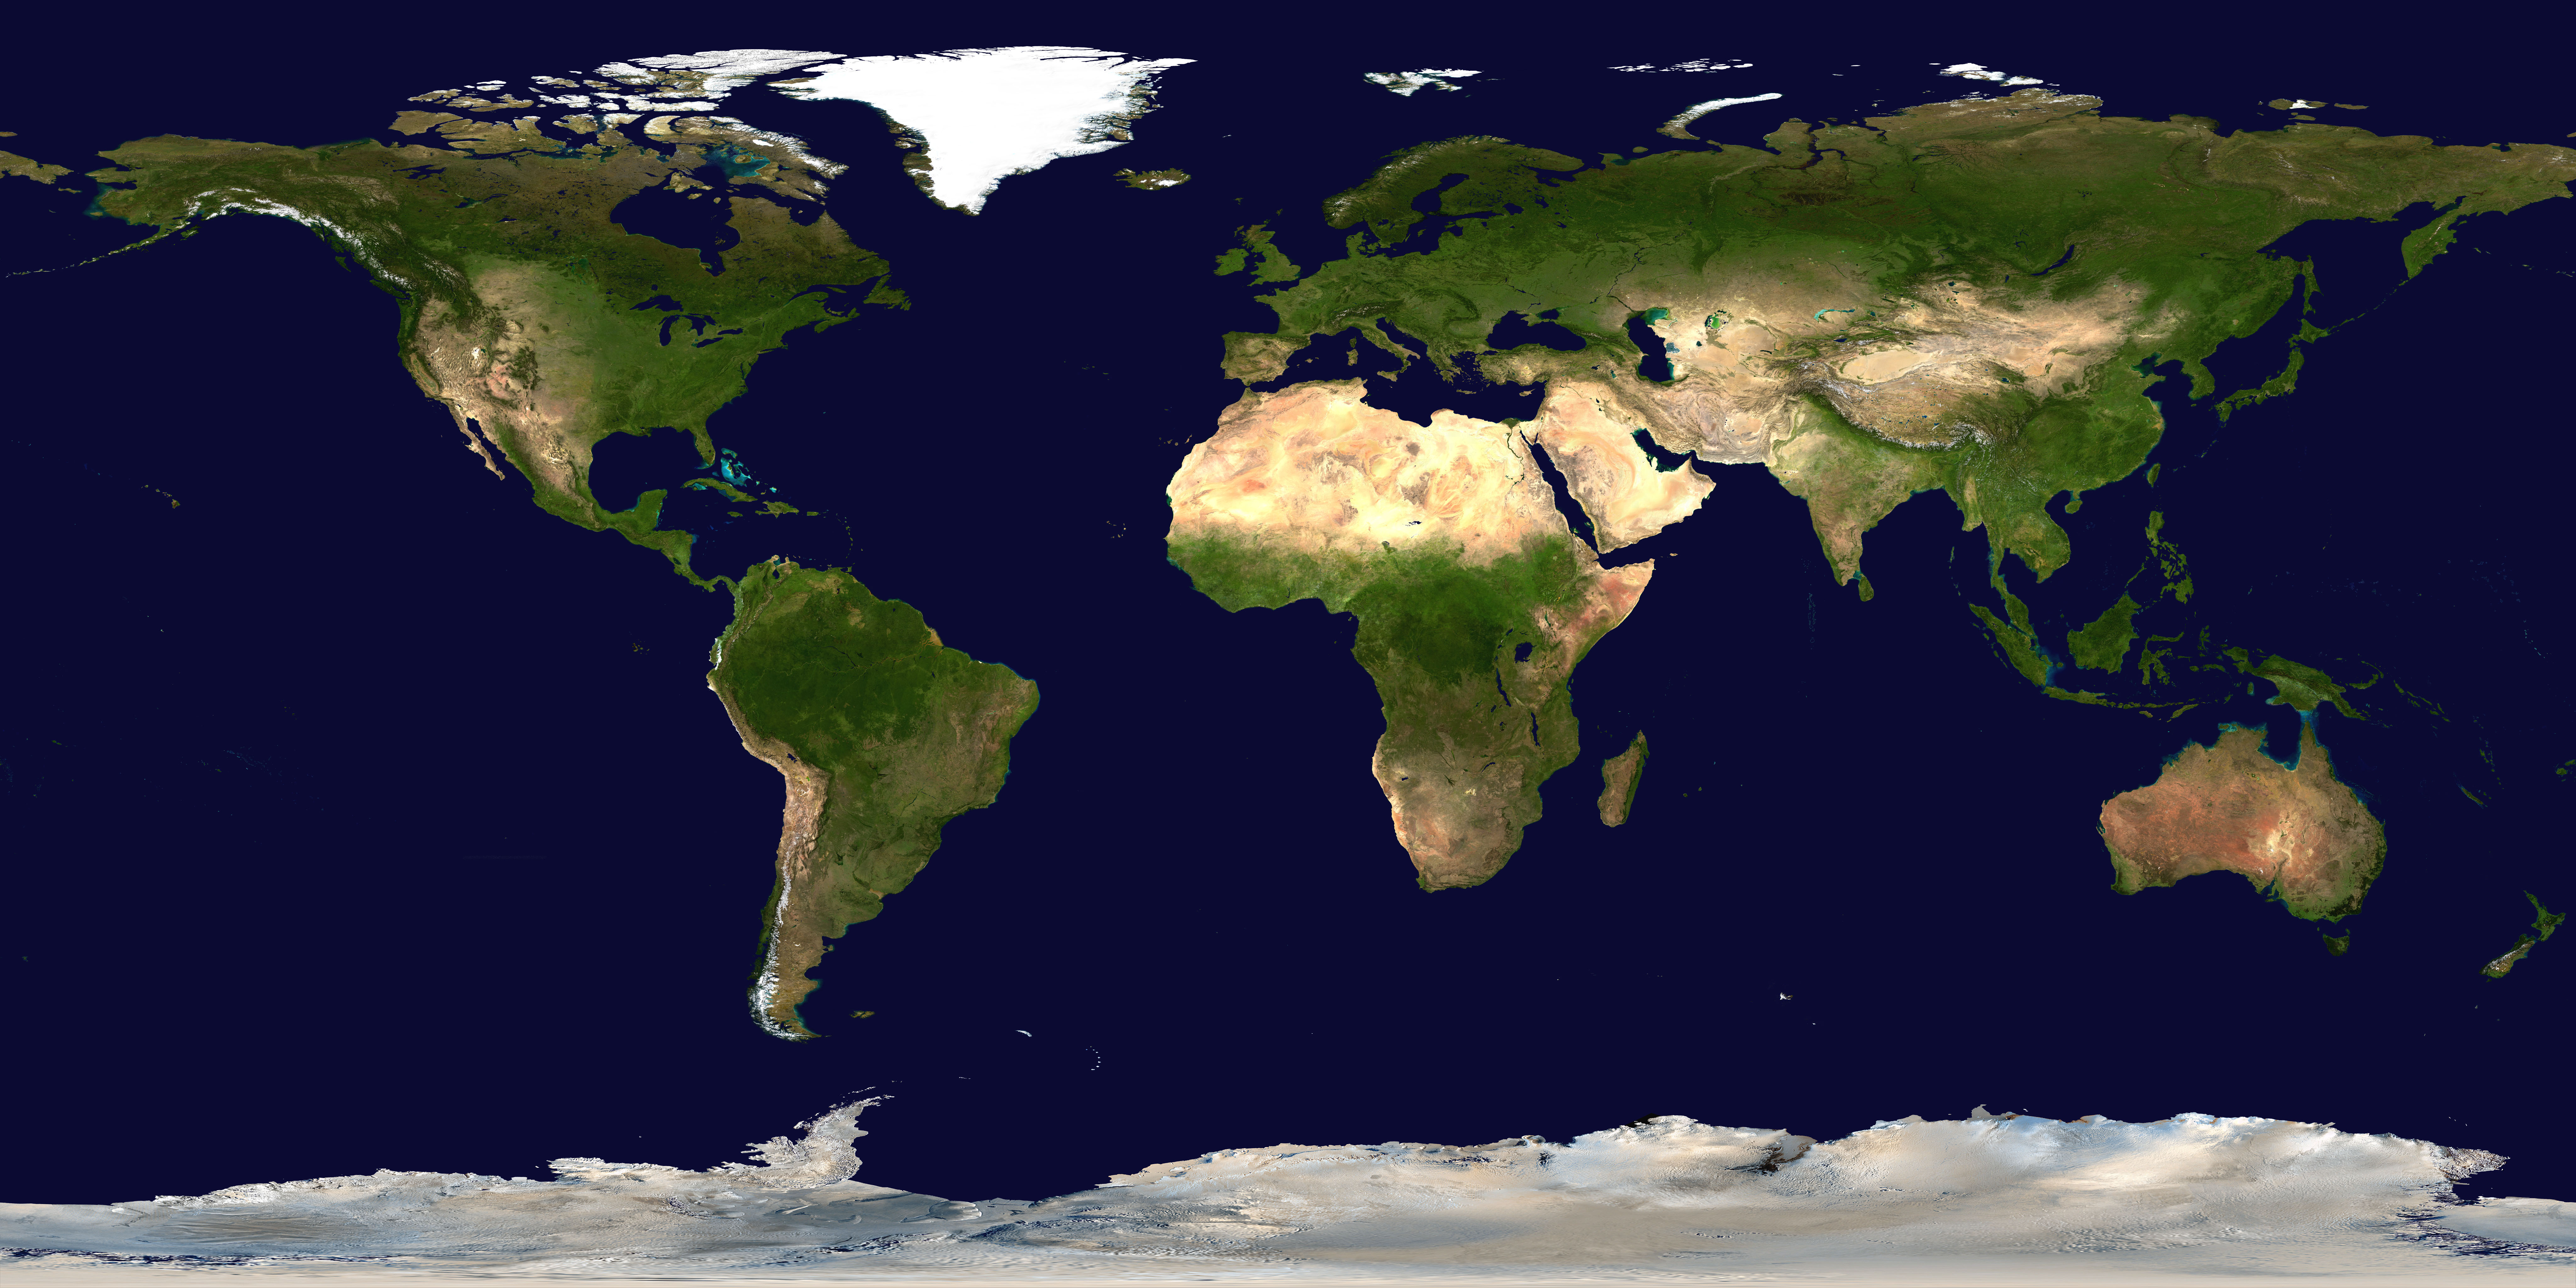 Image of the Earth's Surface with clouds removed from Terra Satellite imagery.